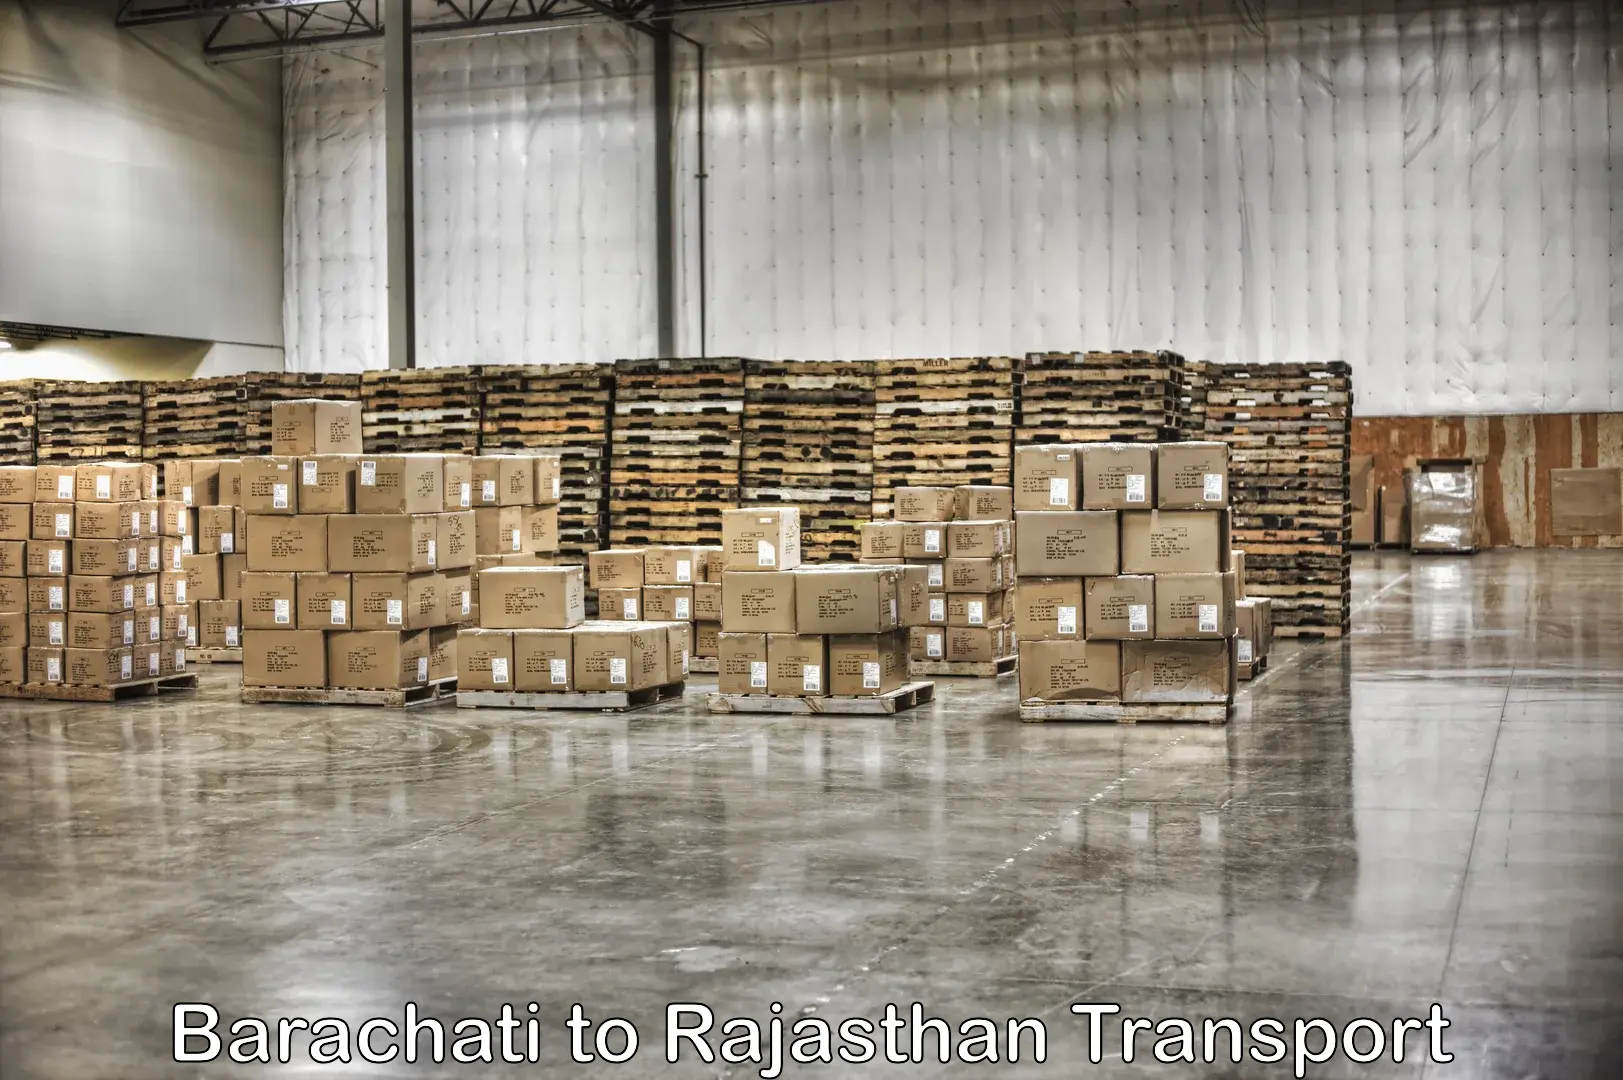 Truck transport companies in India Barachati to Barmer